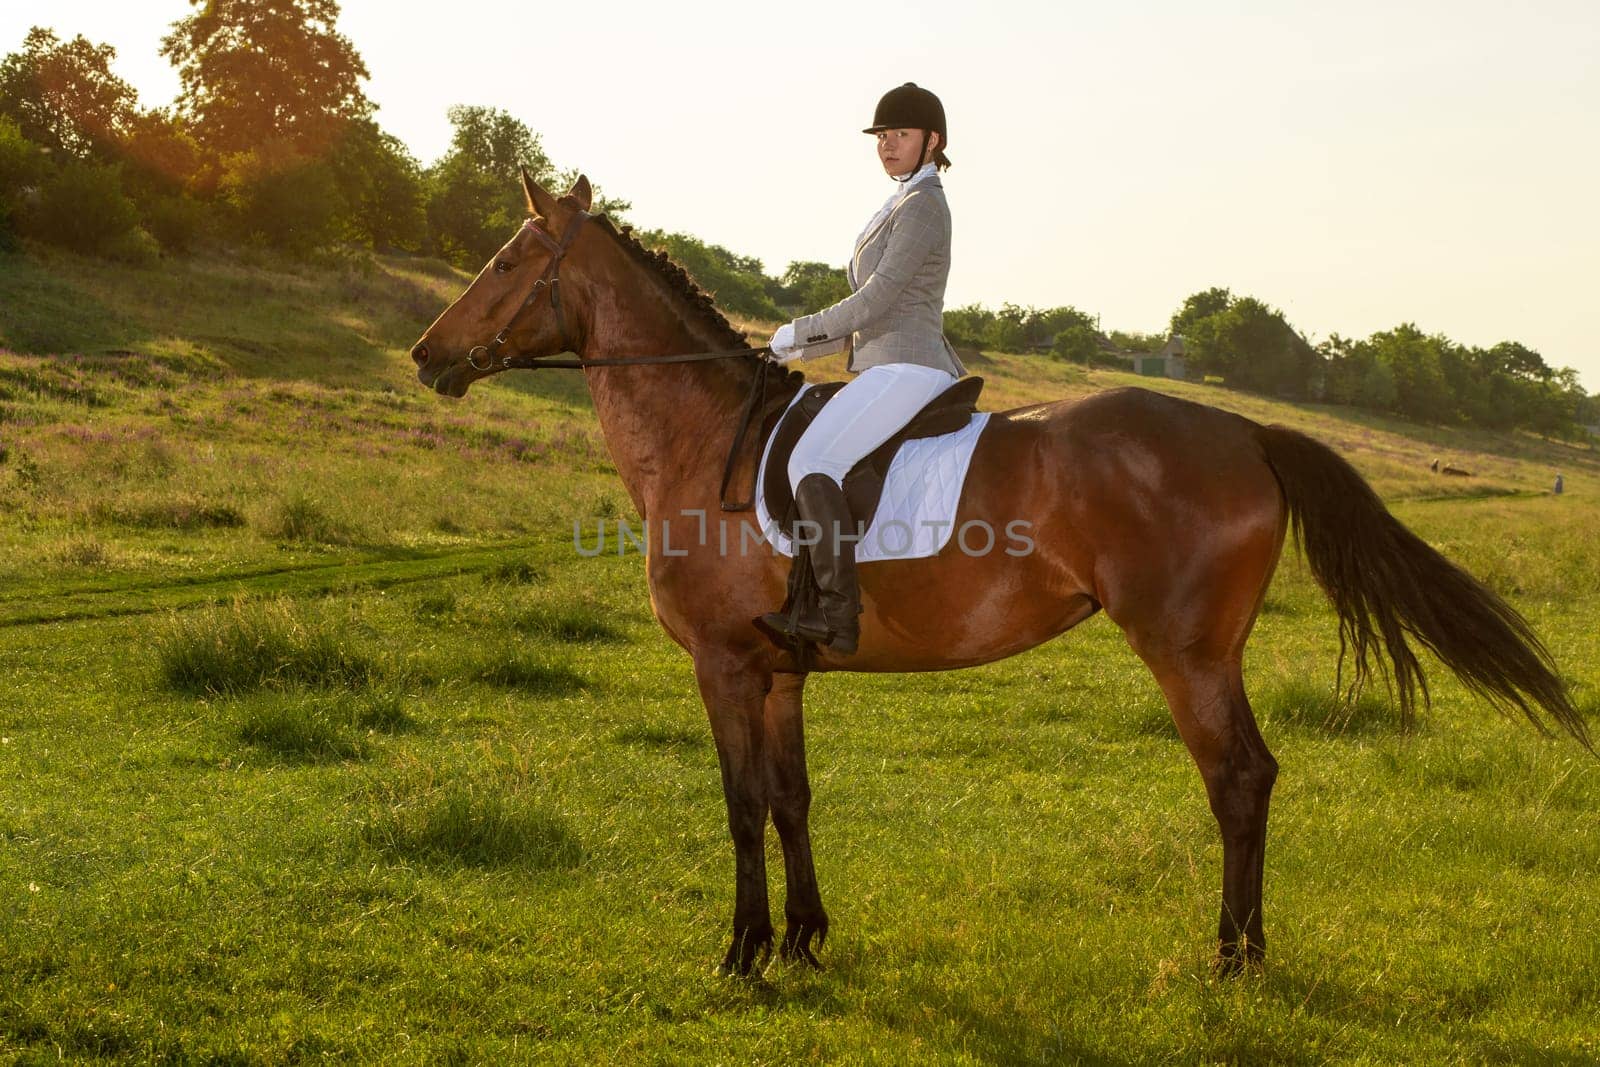 Young woman riding a horse on the green field. Horseback Riding. Competition. Hobby